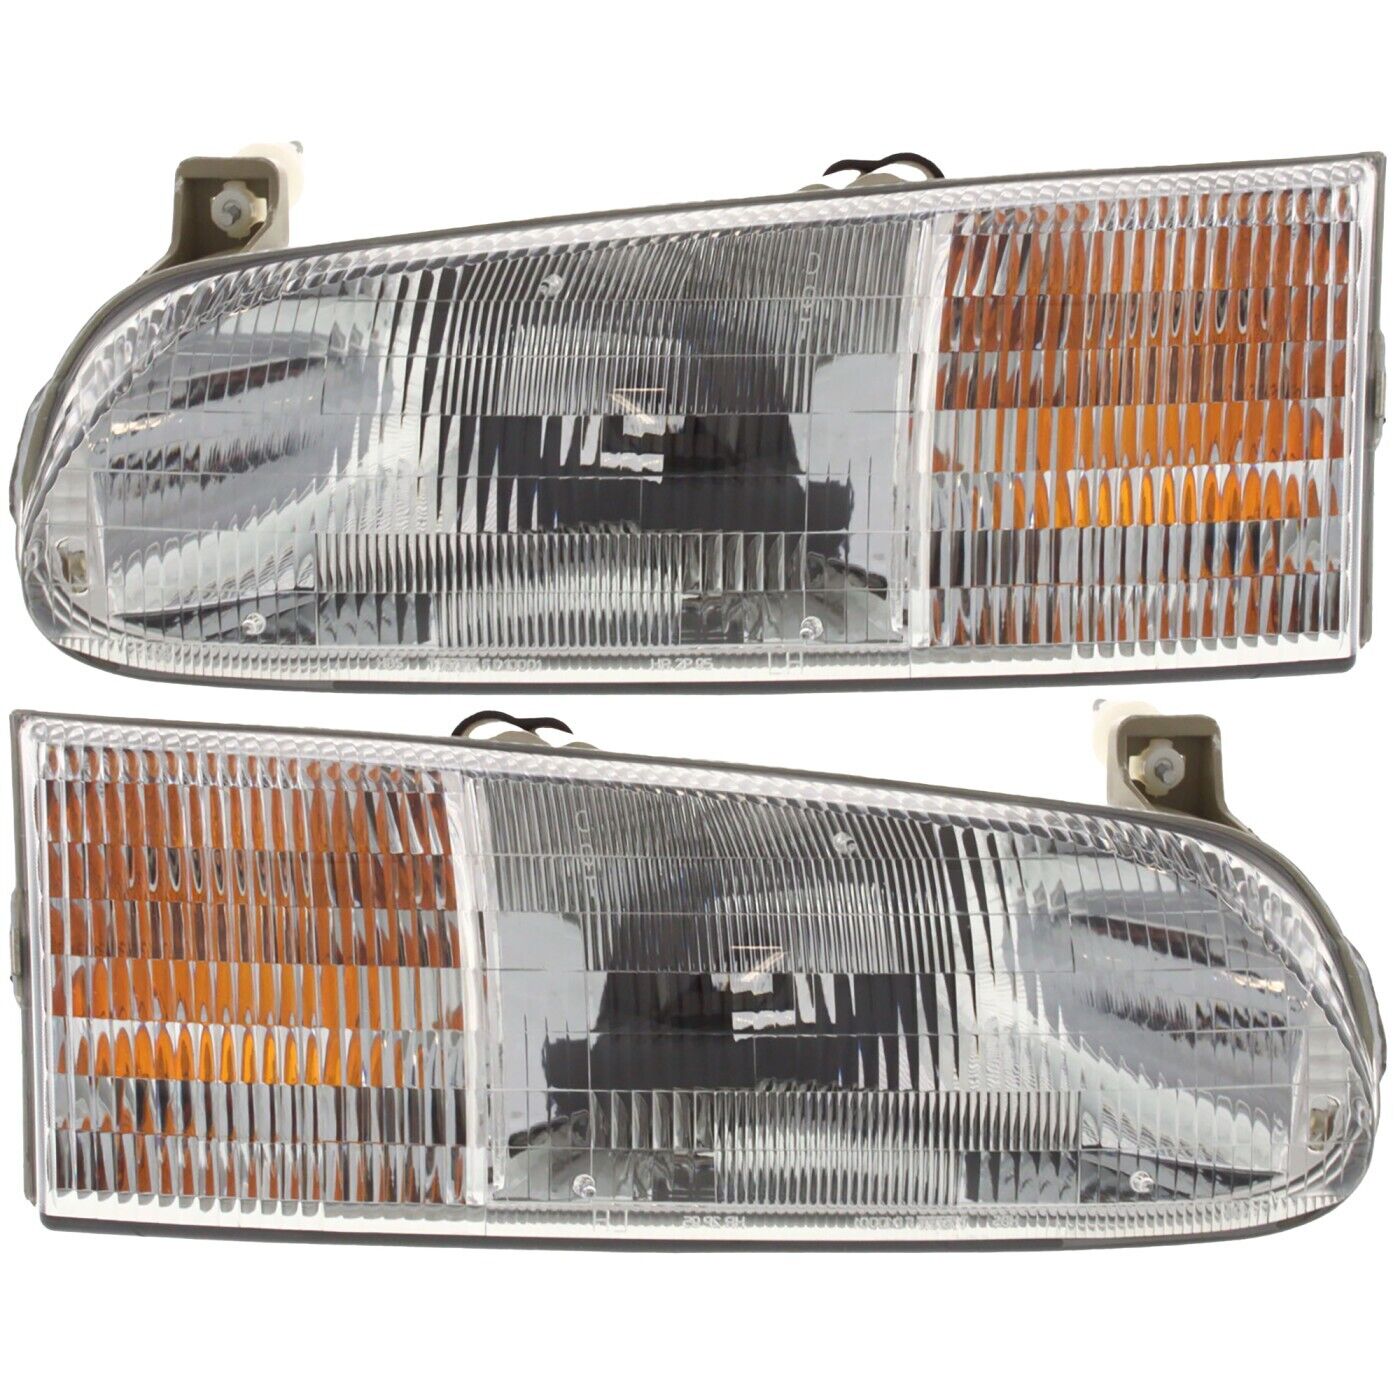 Headlights Headlamps Left & Right Pair Set for 95-97 Ford Windstar